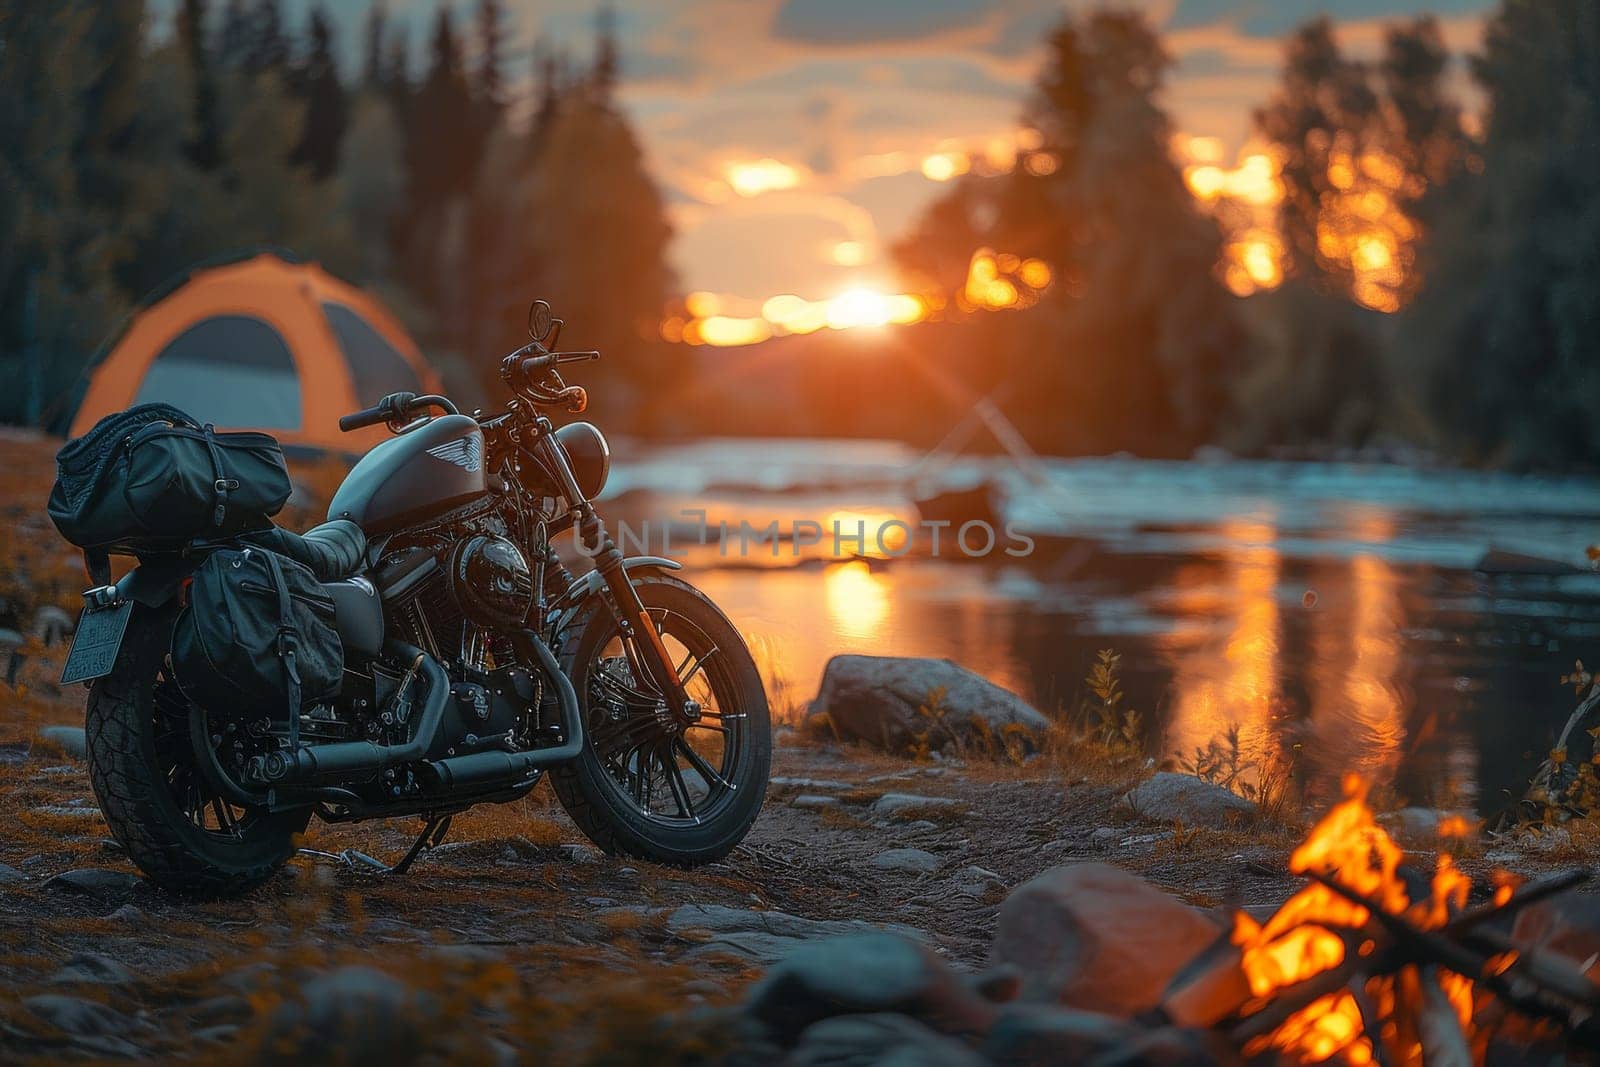 A motorcycle is parked next to a tent by a lake. The scene is peaceful and serene, with the motorcycle and tent blending in with the natural surroundings. The motorcycle is a black